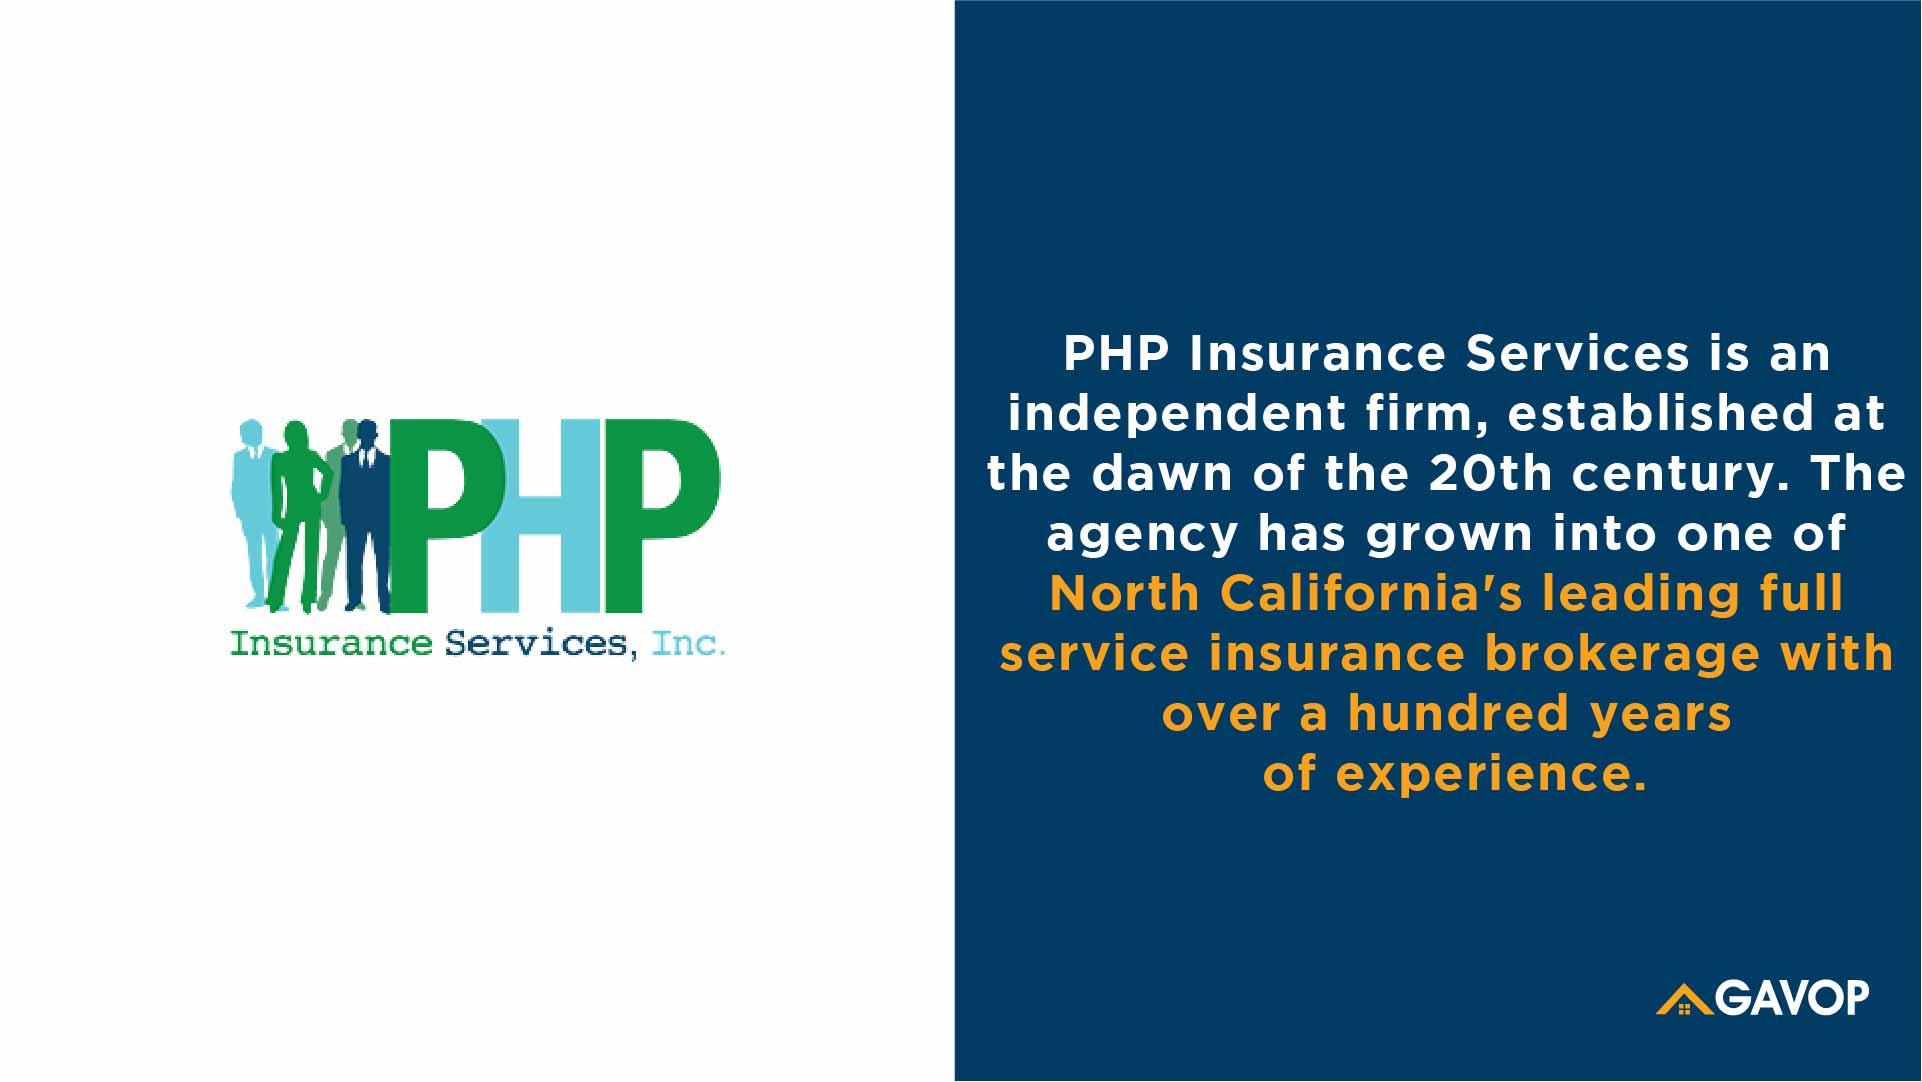 PHP Insurance Services, Inc